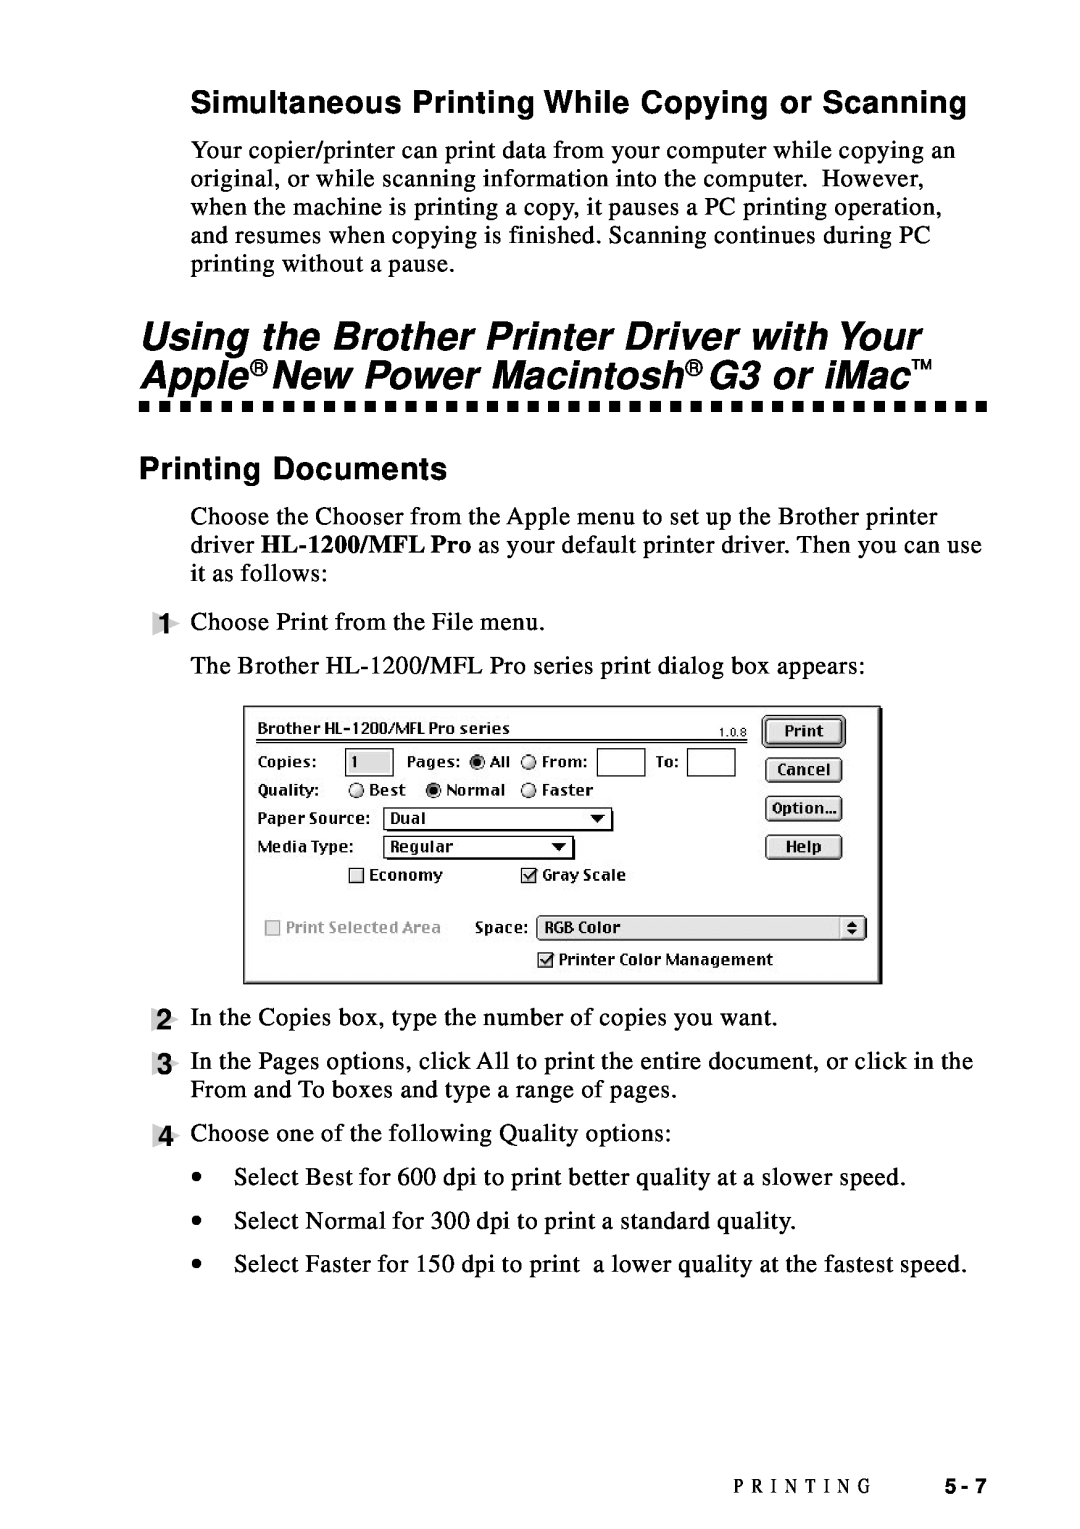 Brother DCP1200 manual Simultaneous Printing While Copying or Scanning, Printing Documents 